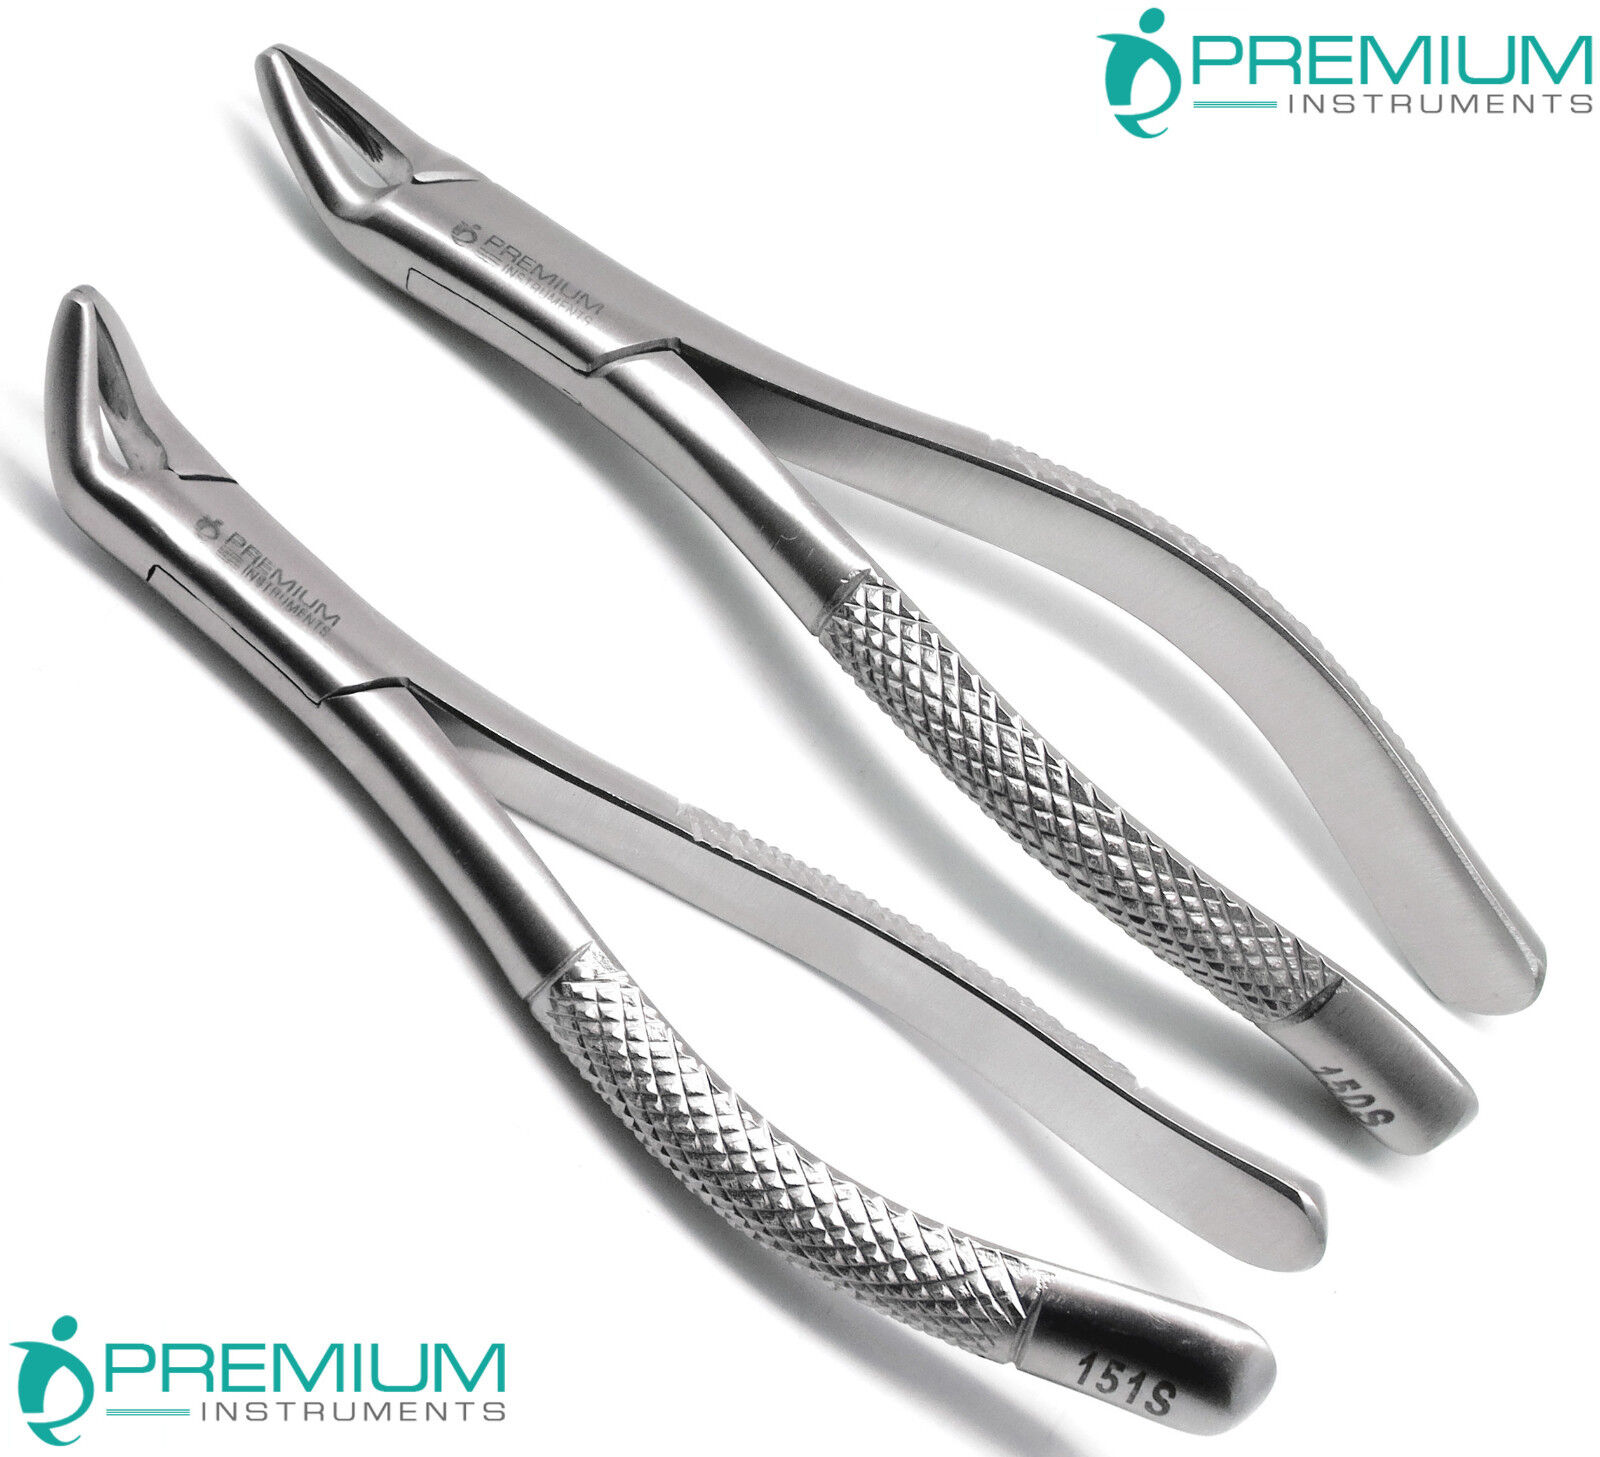 Dental Extracting Forceps 150s & 151s Surgical Tooth Extraction Tools Set of 2